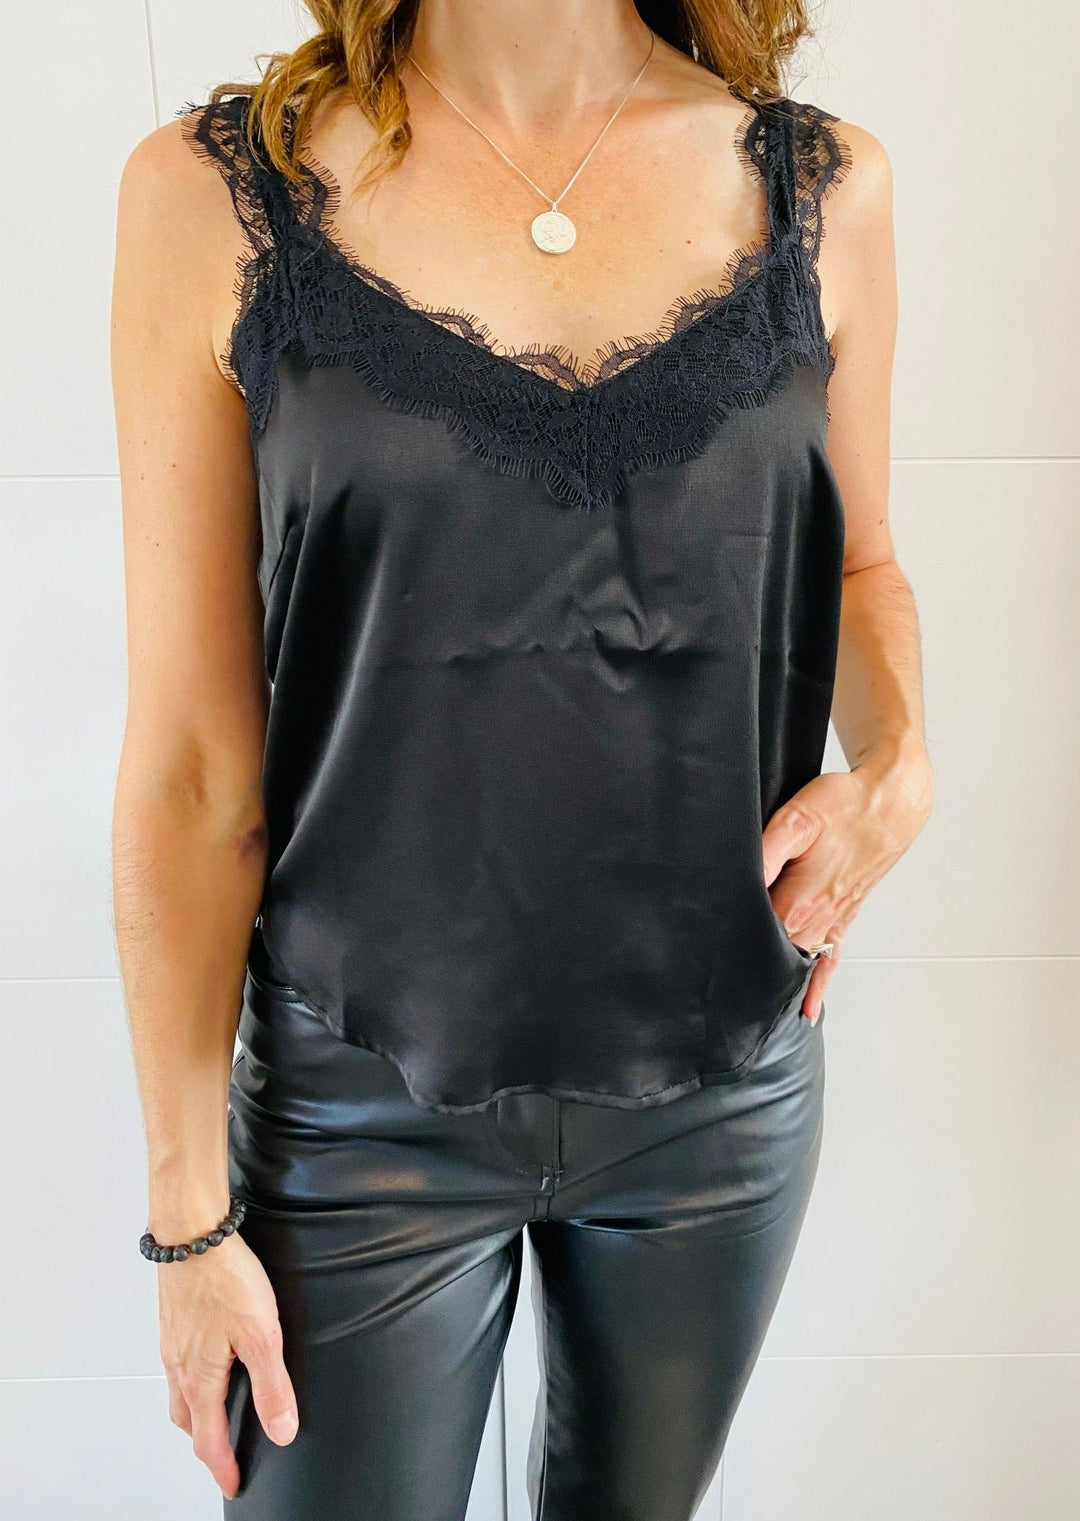 Sidestreet Boutique :: Shop By Brand :: Pol :: Lace Detailed Flowy Camisole